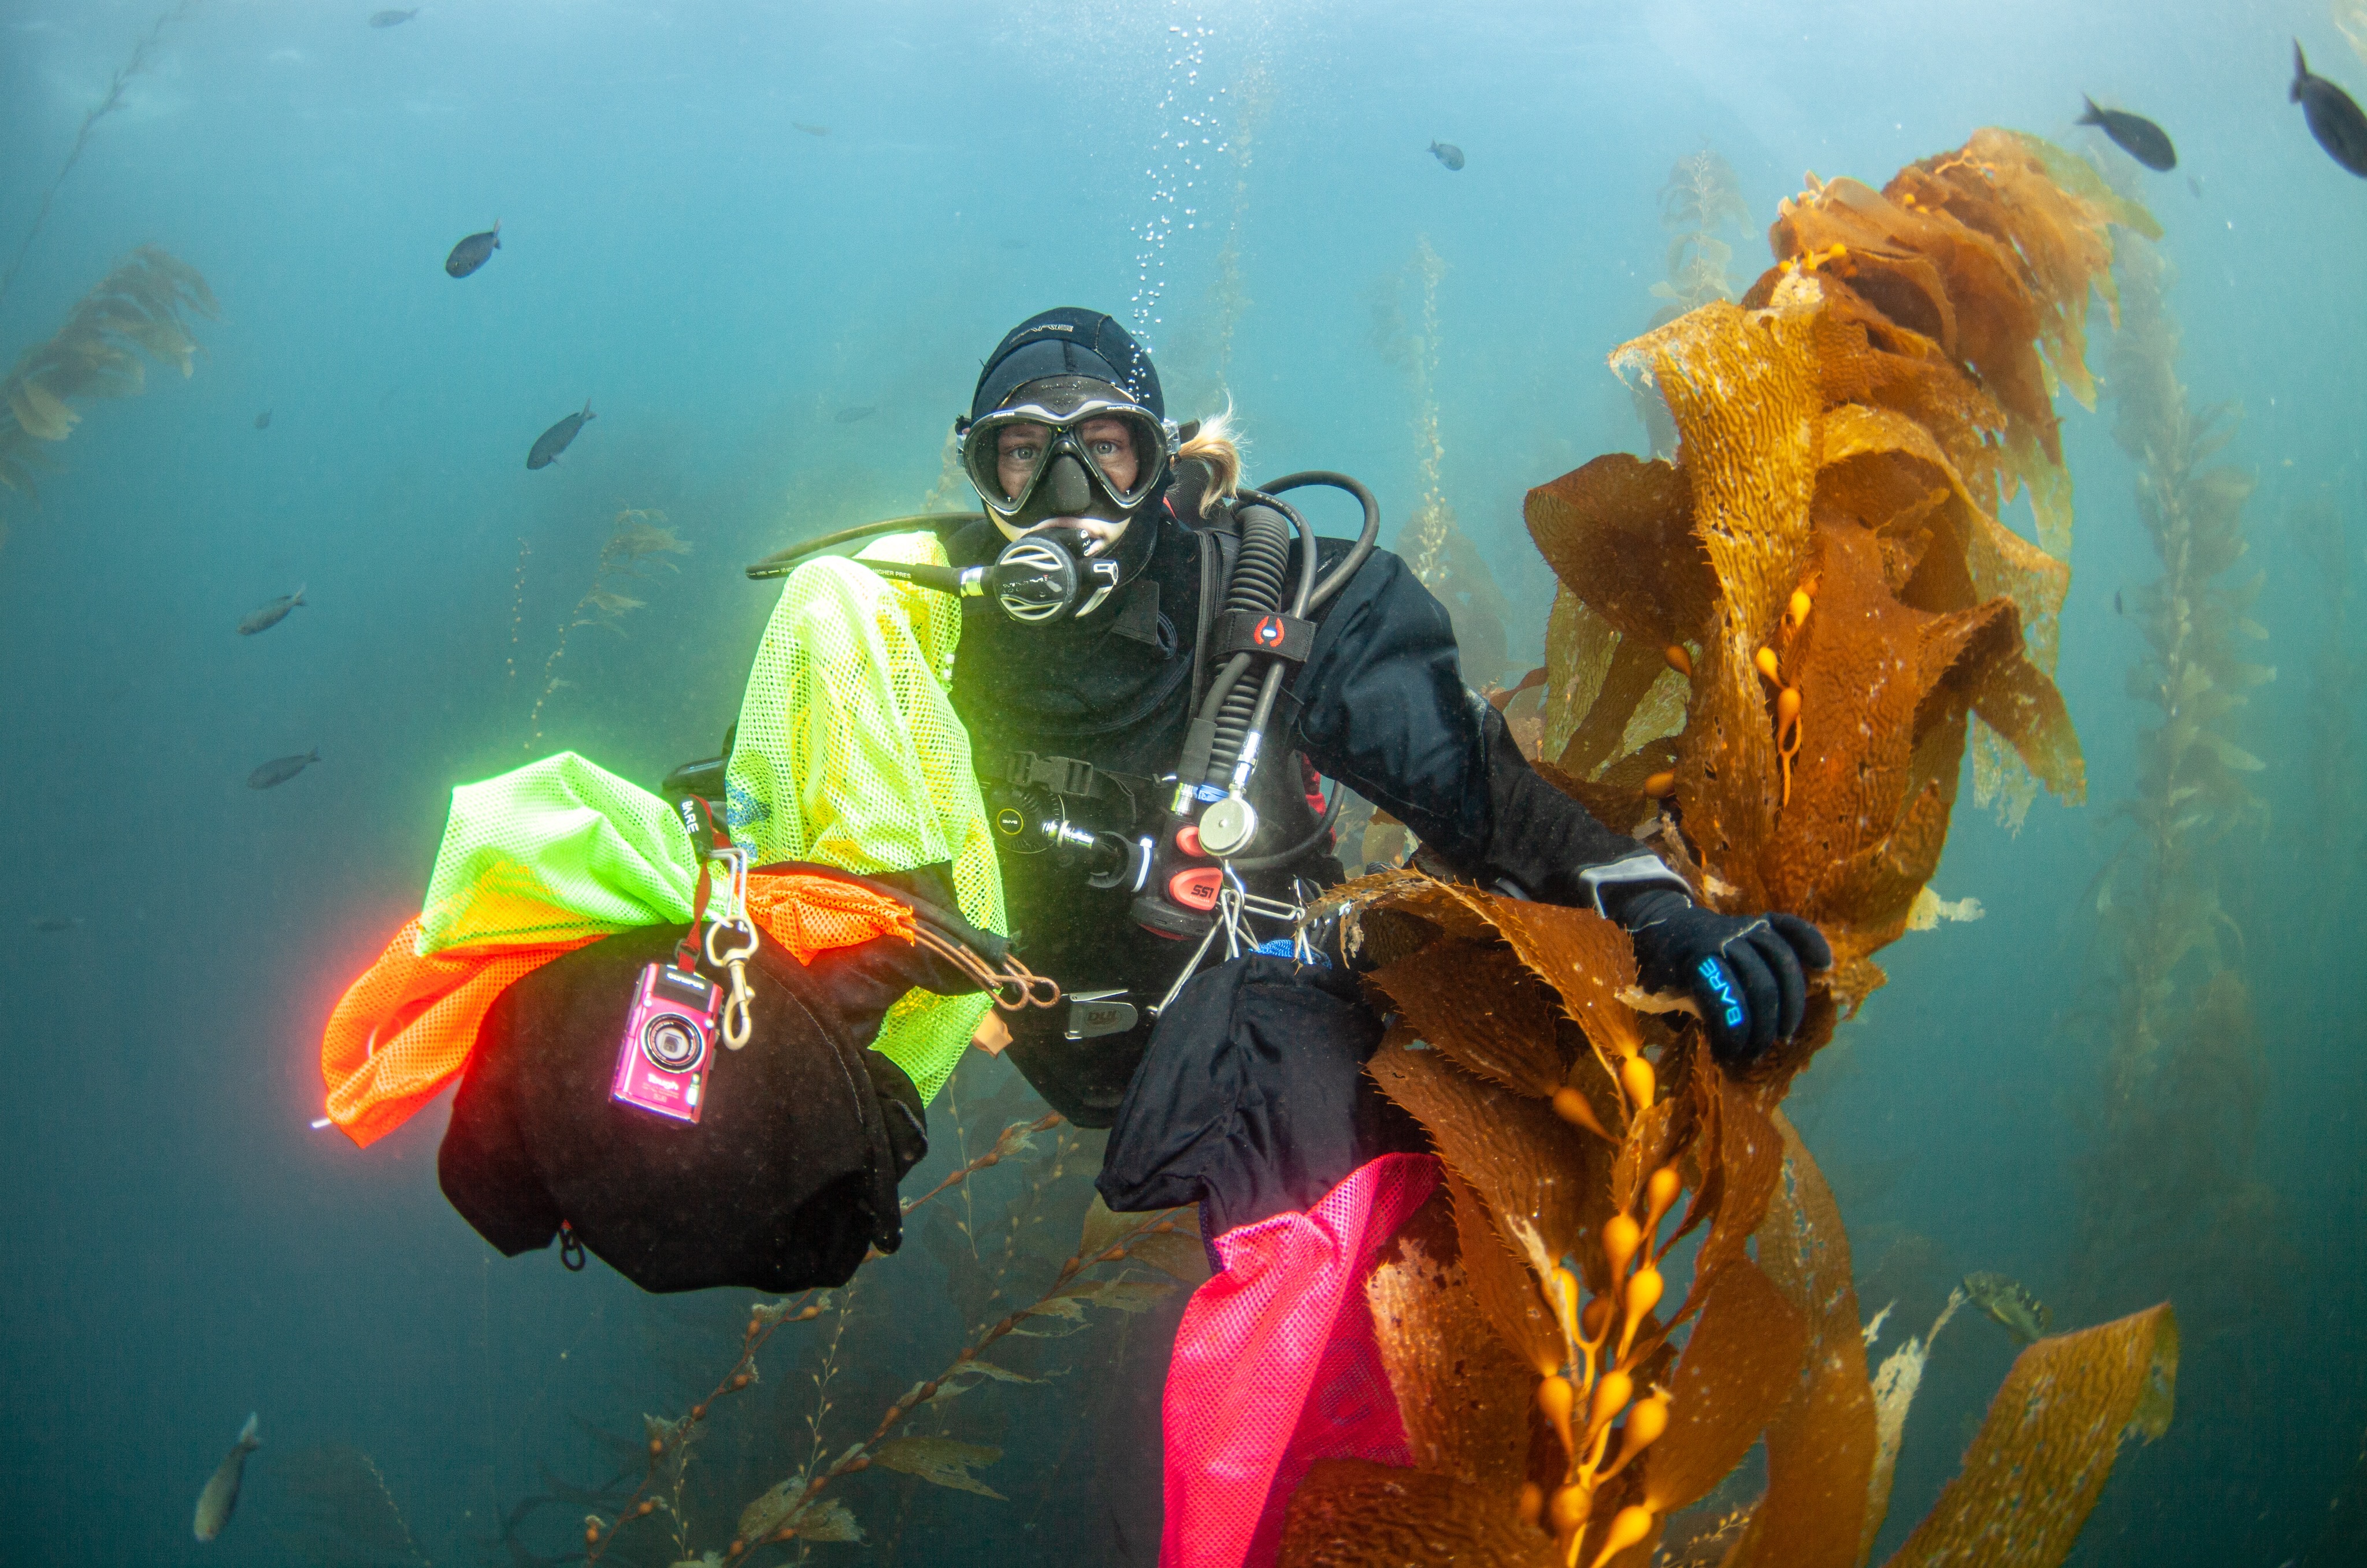 UCSB Students receive educational training at The REEF